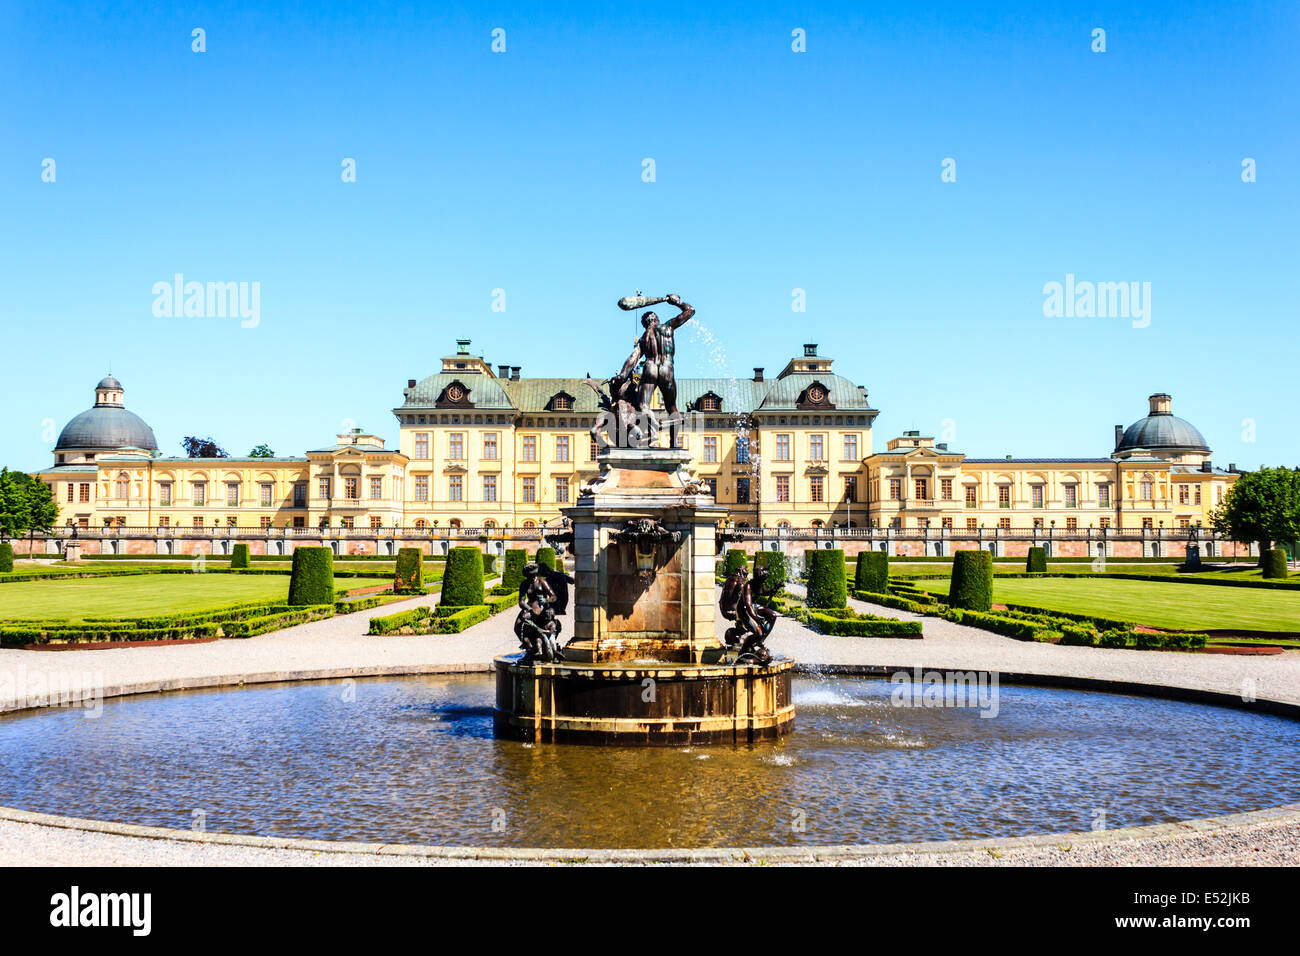 Fountain in front of Drottningholms slott (royal palace) outside of Stockholm, Sweden Stock Photo